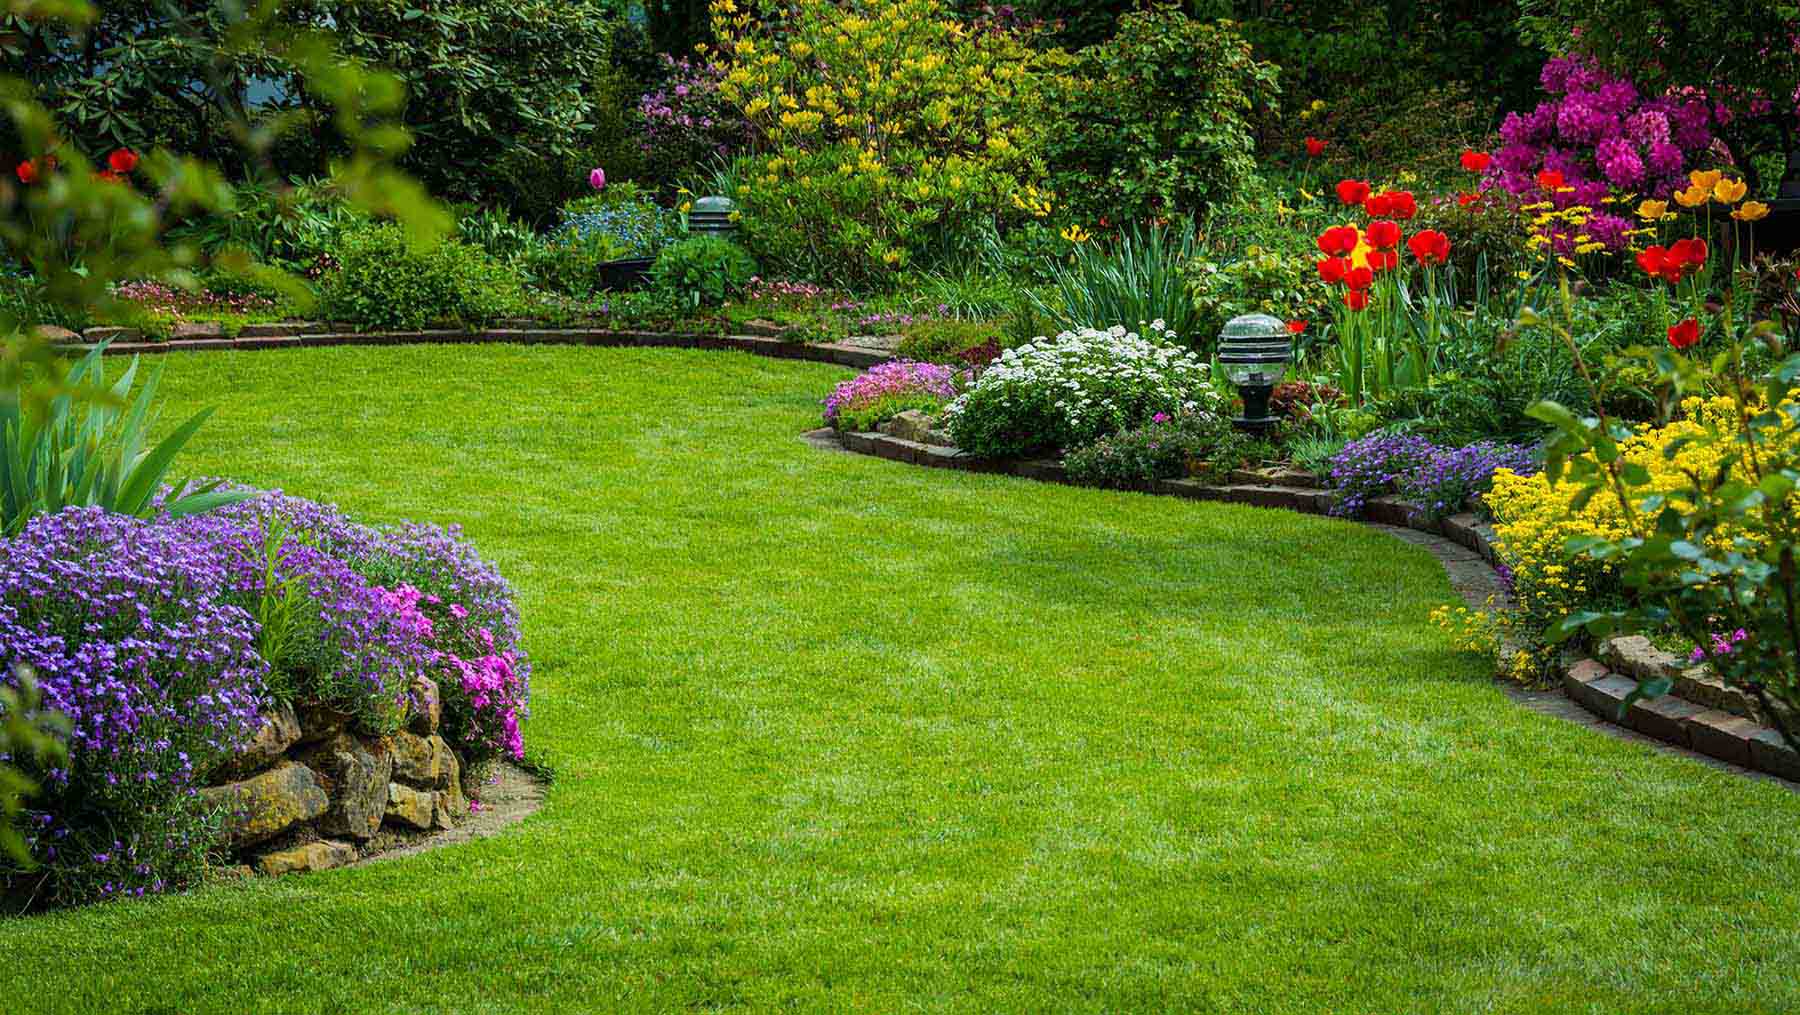 A garden with a lawn, flowers and bushes.